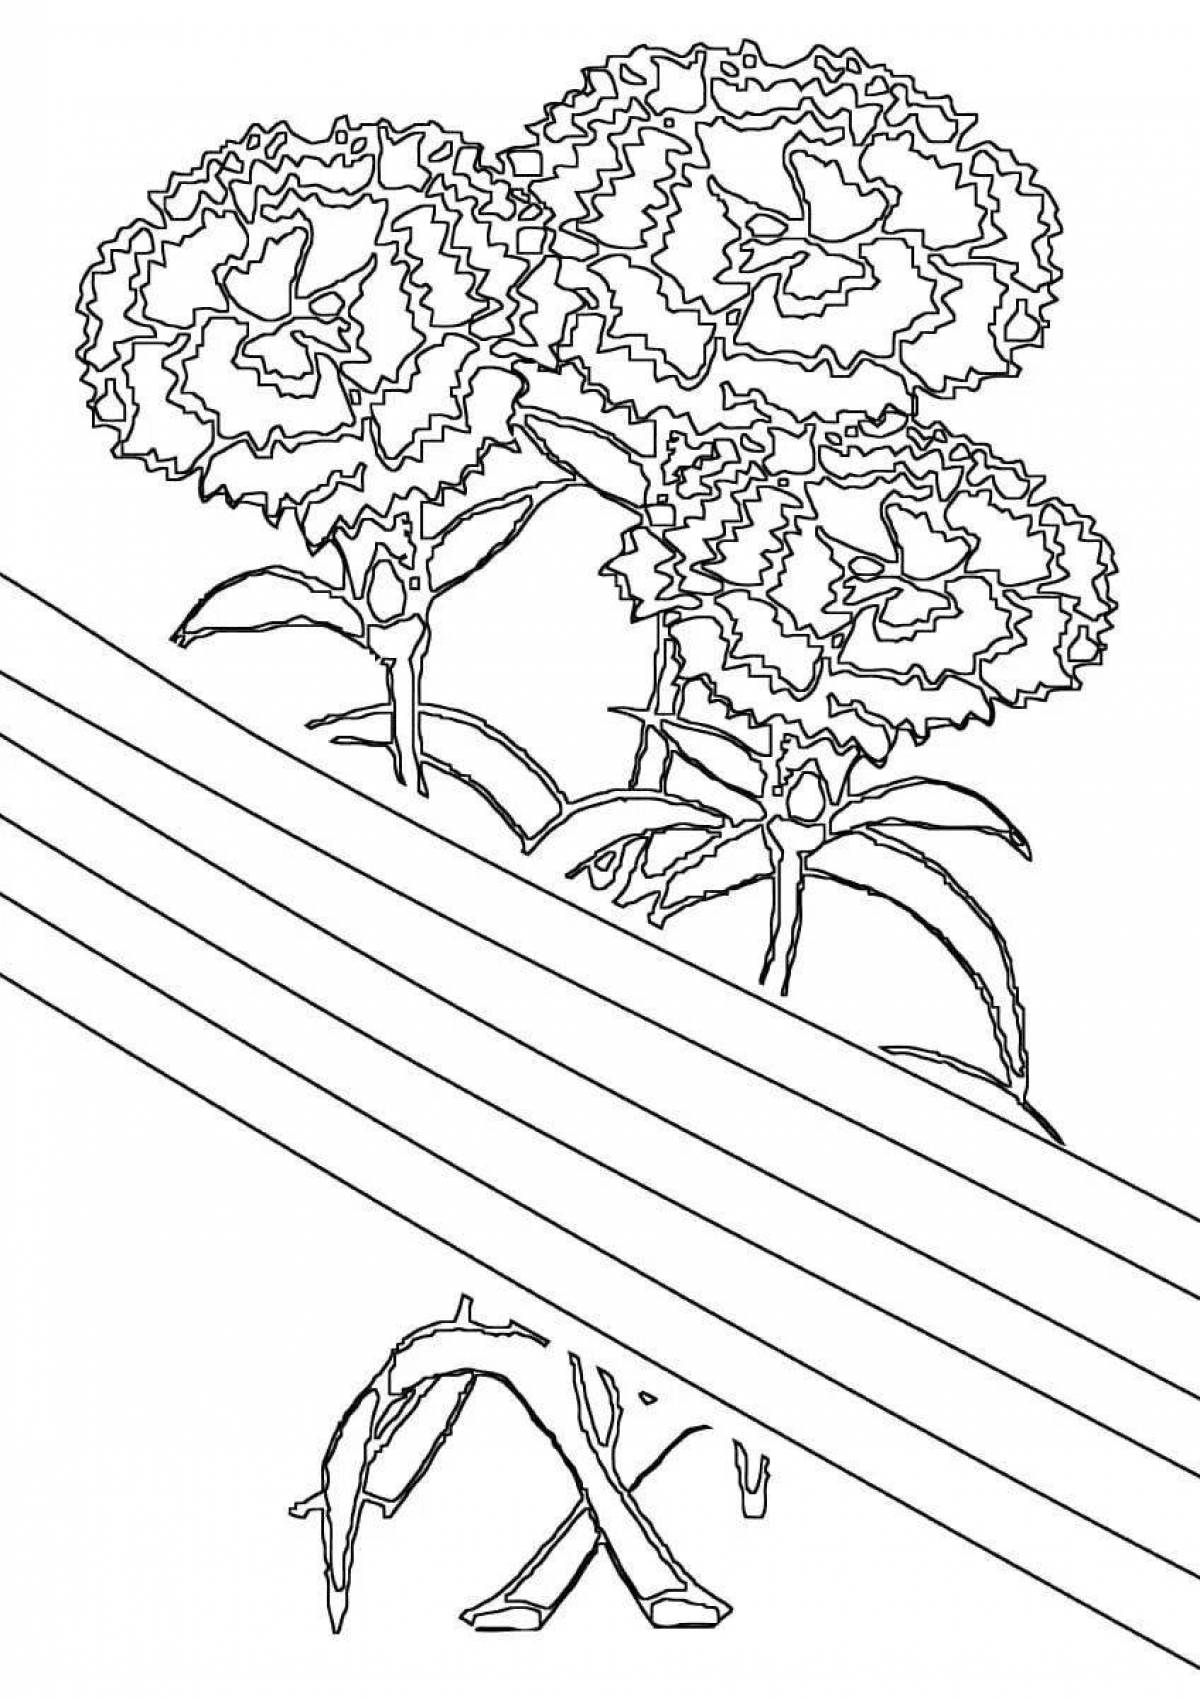 Carnation coloring pages for May 9th